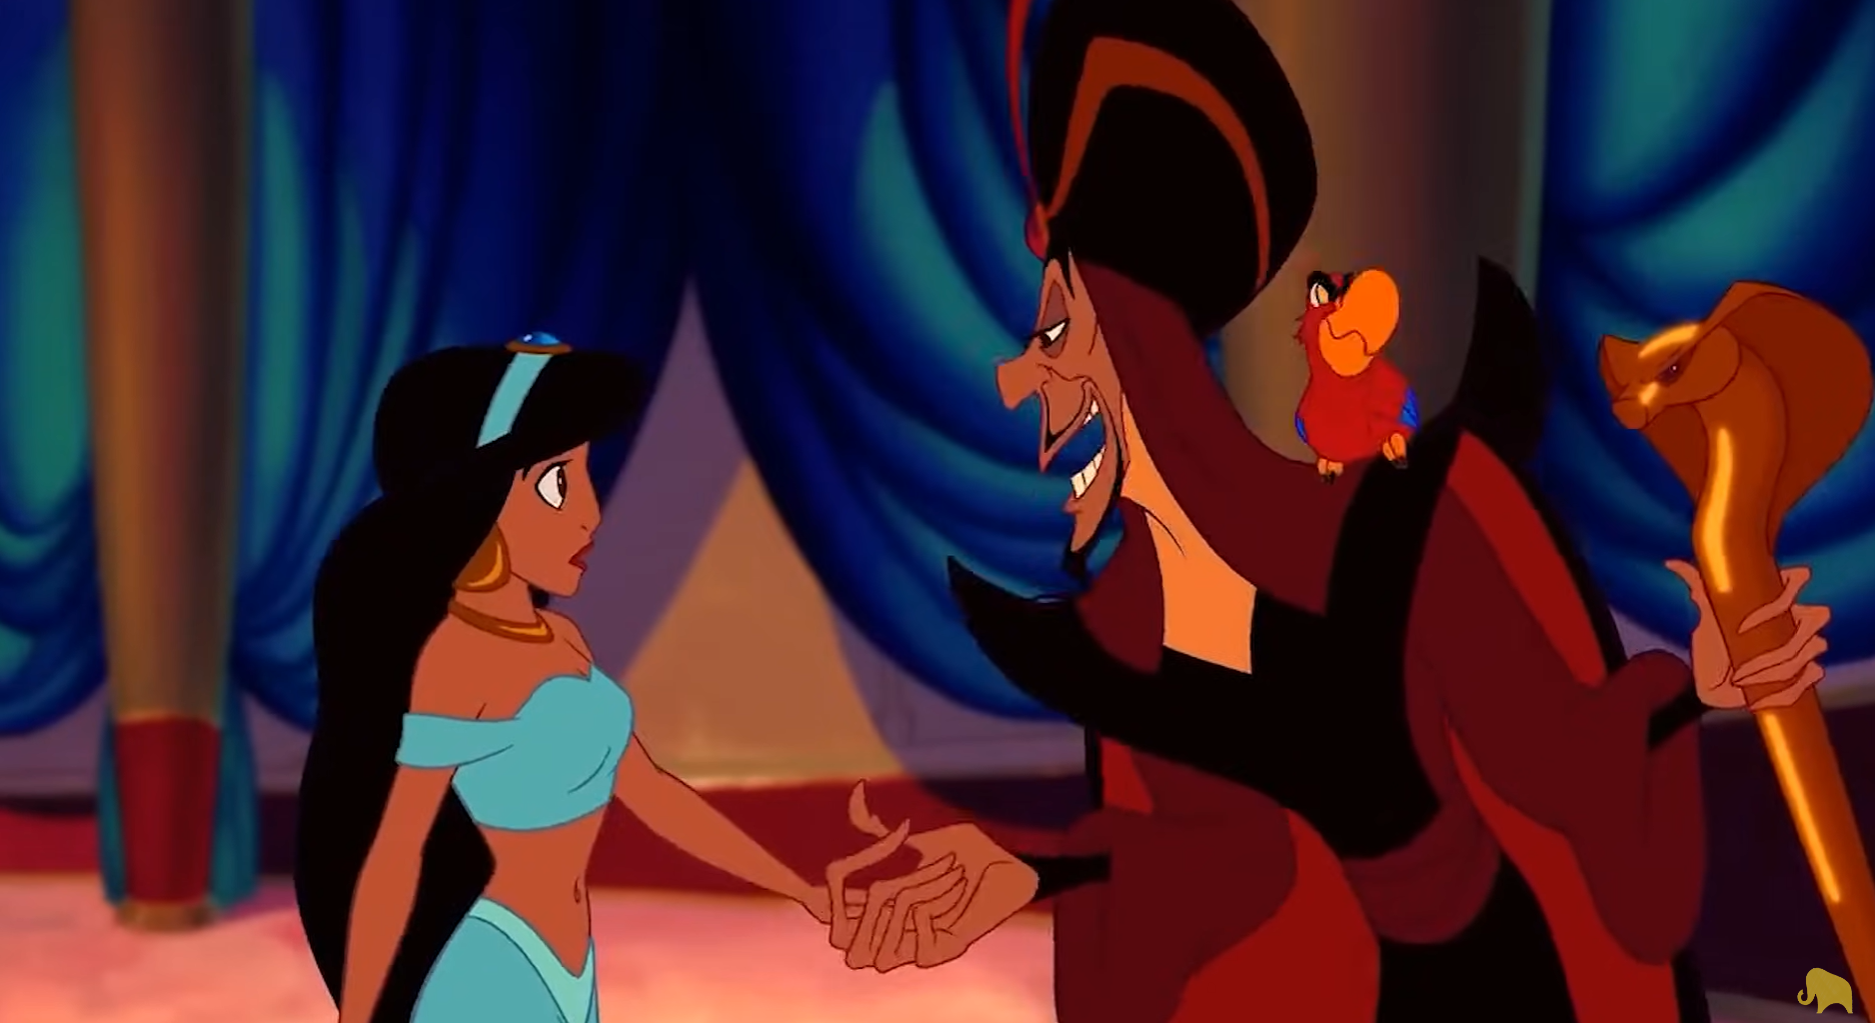 A scene from Disney's Aladdin showing turquoise and red colours